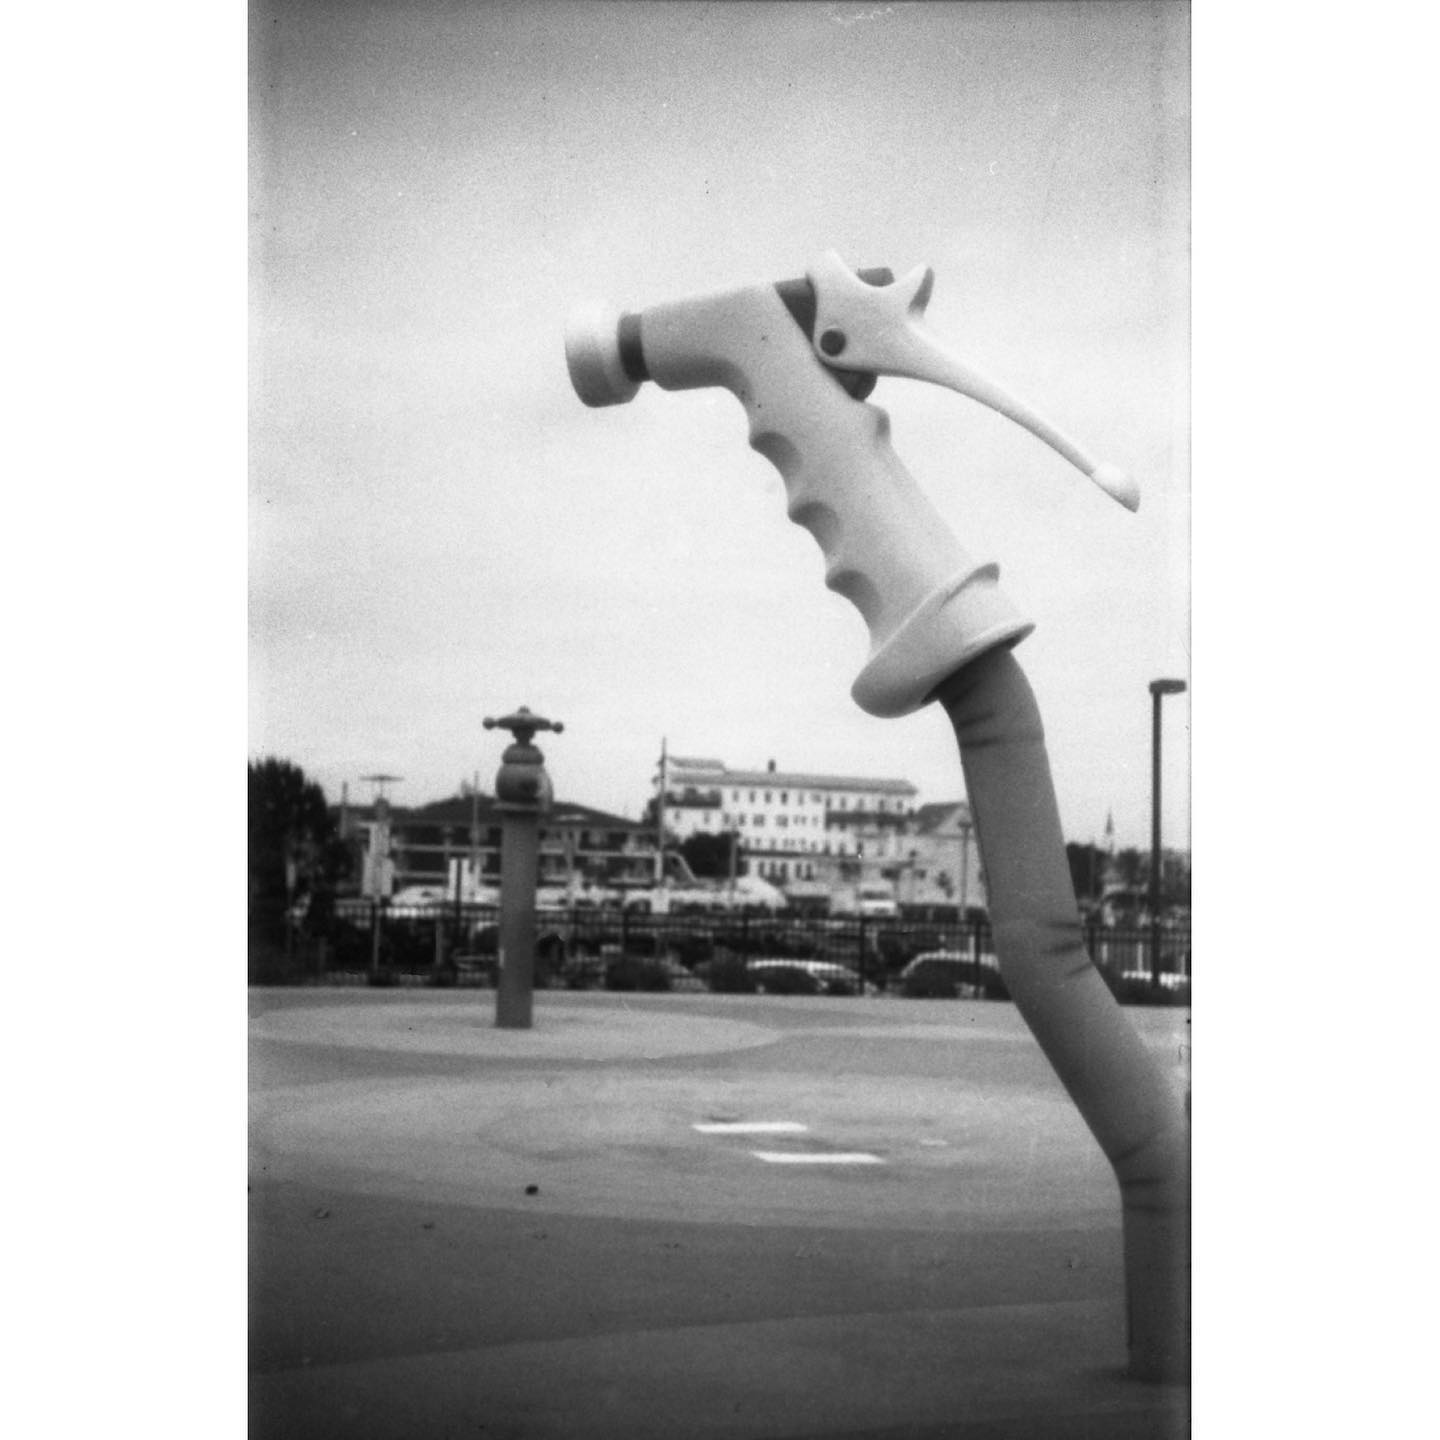 Spray

Water park on the boardwalk in Asbury Park. Shot with my #contaxiiia on Eastman No. 10 that expired in 1931 (90+ years old). #film #filmphotography #allthroughalenspodcast #staybrokeshootfilm #expiredfilm #fossilizedfilm